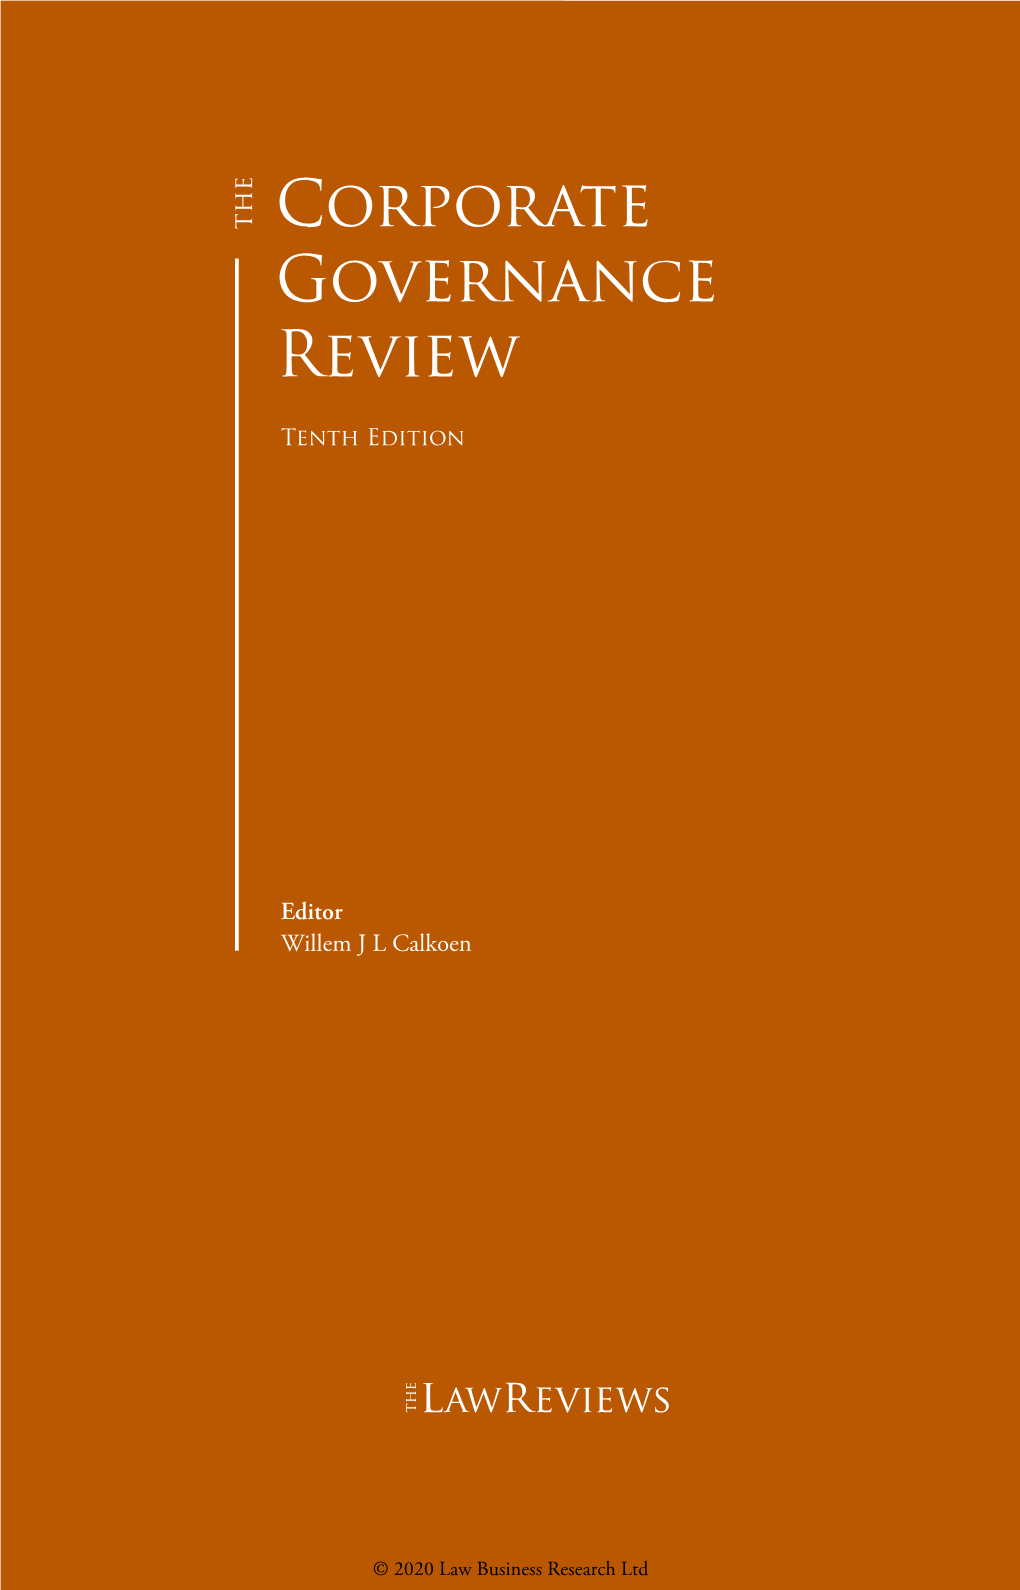 Corporate Governance Review Corporate Governance Review